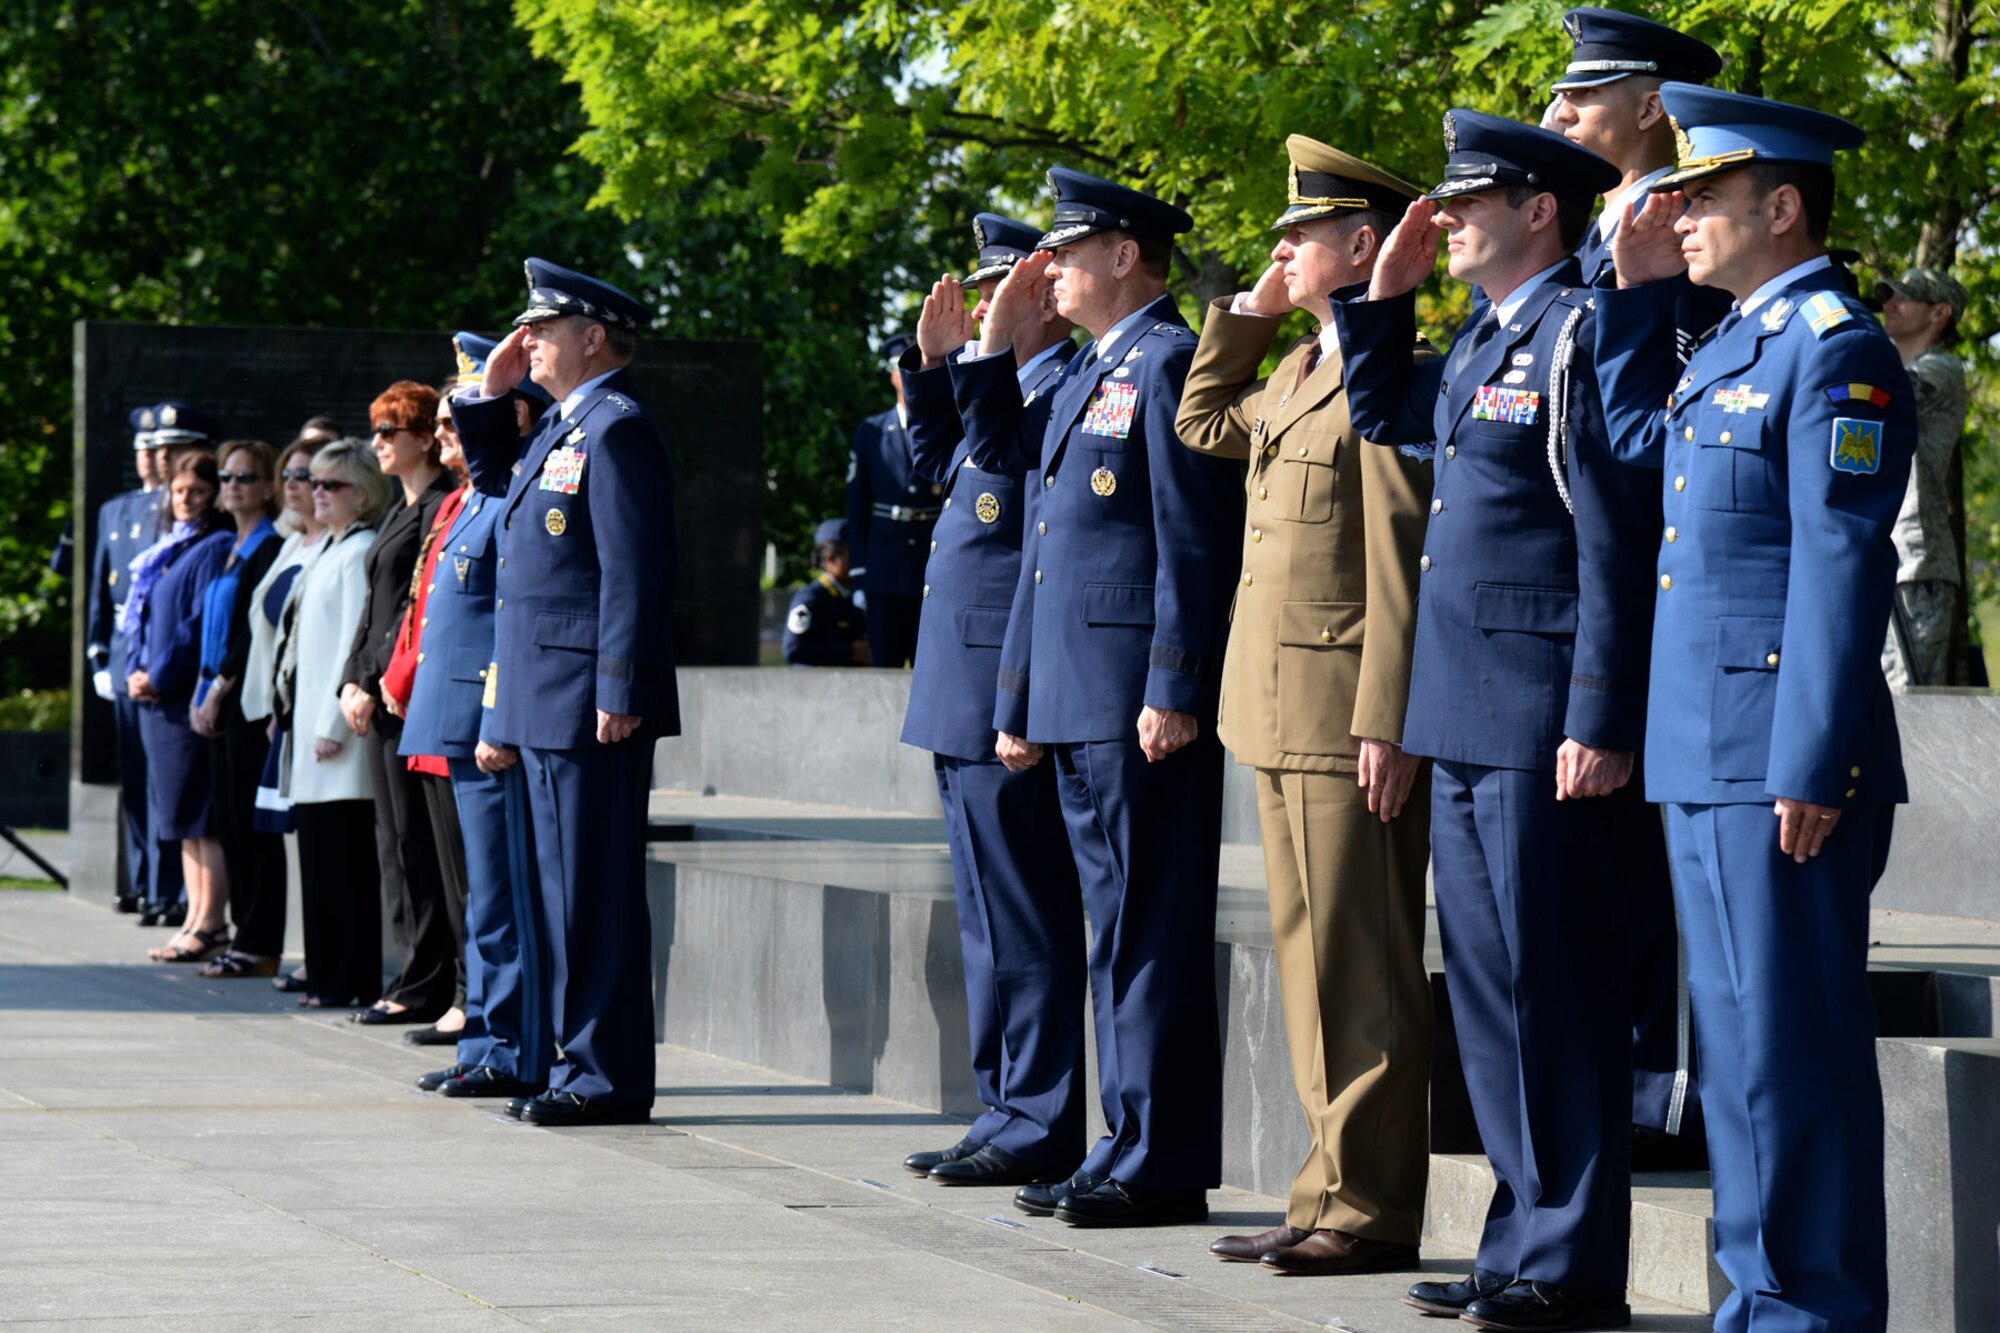 Air Force District of Washington Commander Maj. Gen. Darryl W. Burke salutes
during a welcoming ceremony at the Air Force Memorial May 24, 2016. Gen.
Anastasof visited the National Capital Region as part of the U.S. Air
Force's Counterpart Visit Program. The Air Force District of Washington
brings air, space and cyberspace capabilities to the joint team protecting
the nation's capital, and supports local personnel and those serving
worldwide. (U.S. Air Force Photo/Tech. Sgt. Matt Davis)

